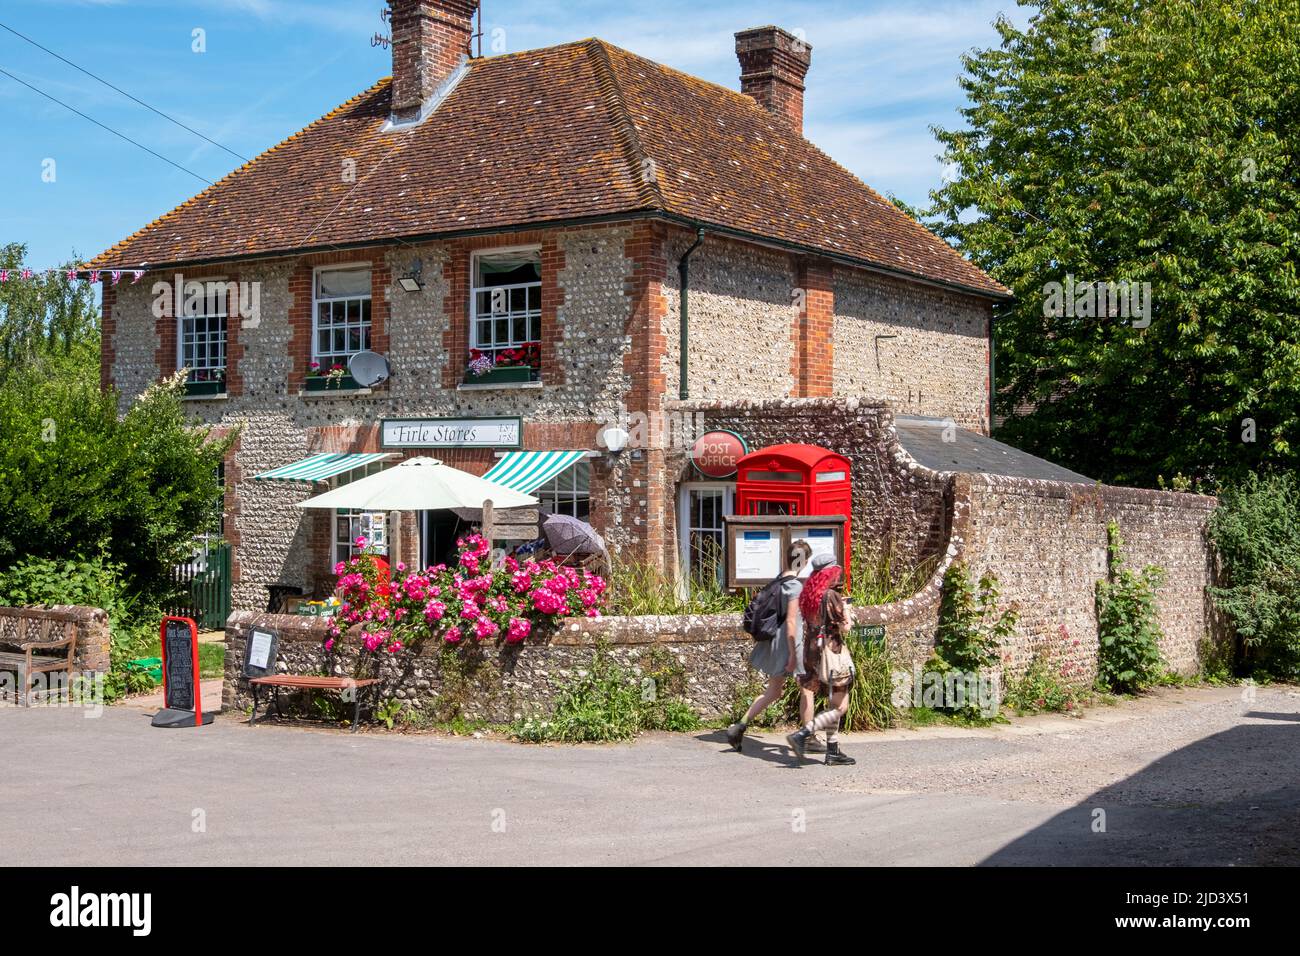 Firle Village Stores, East Sussex, UK Stock Photo